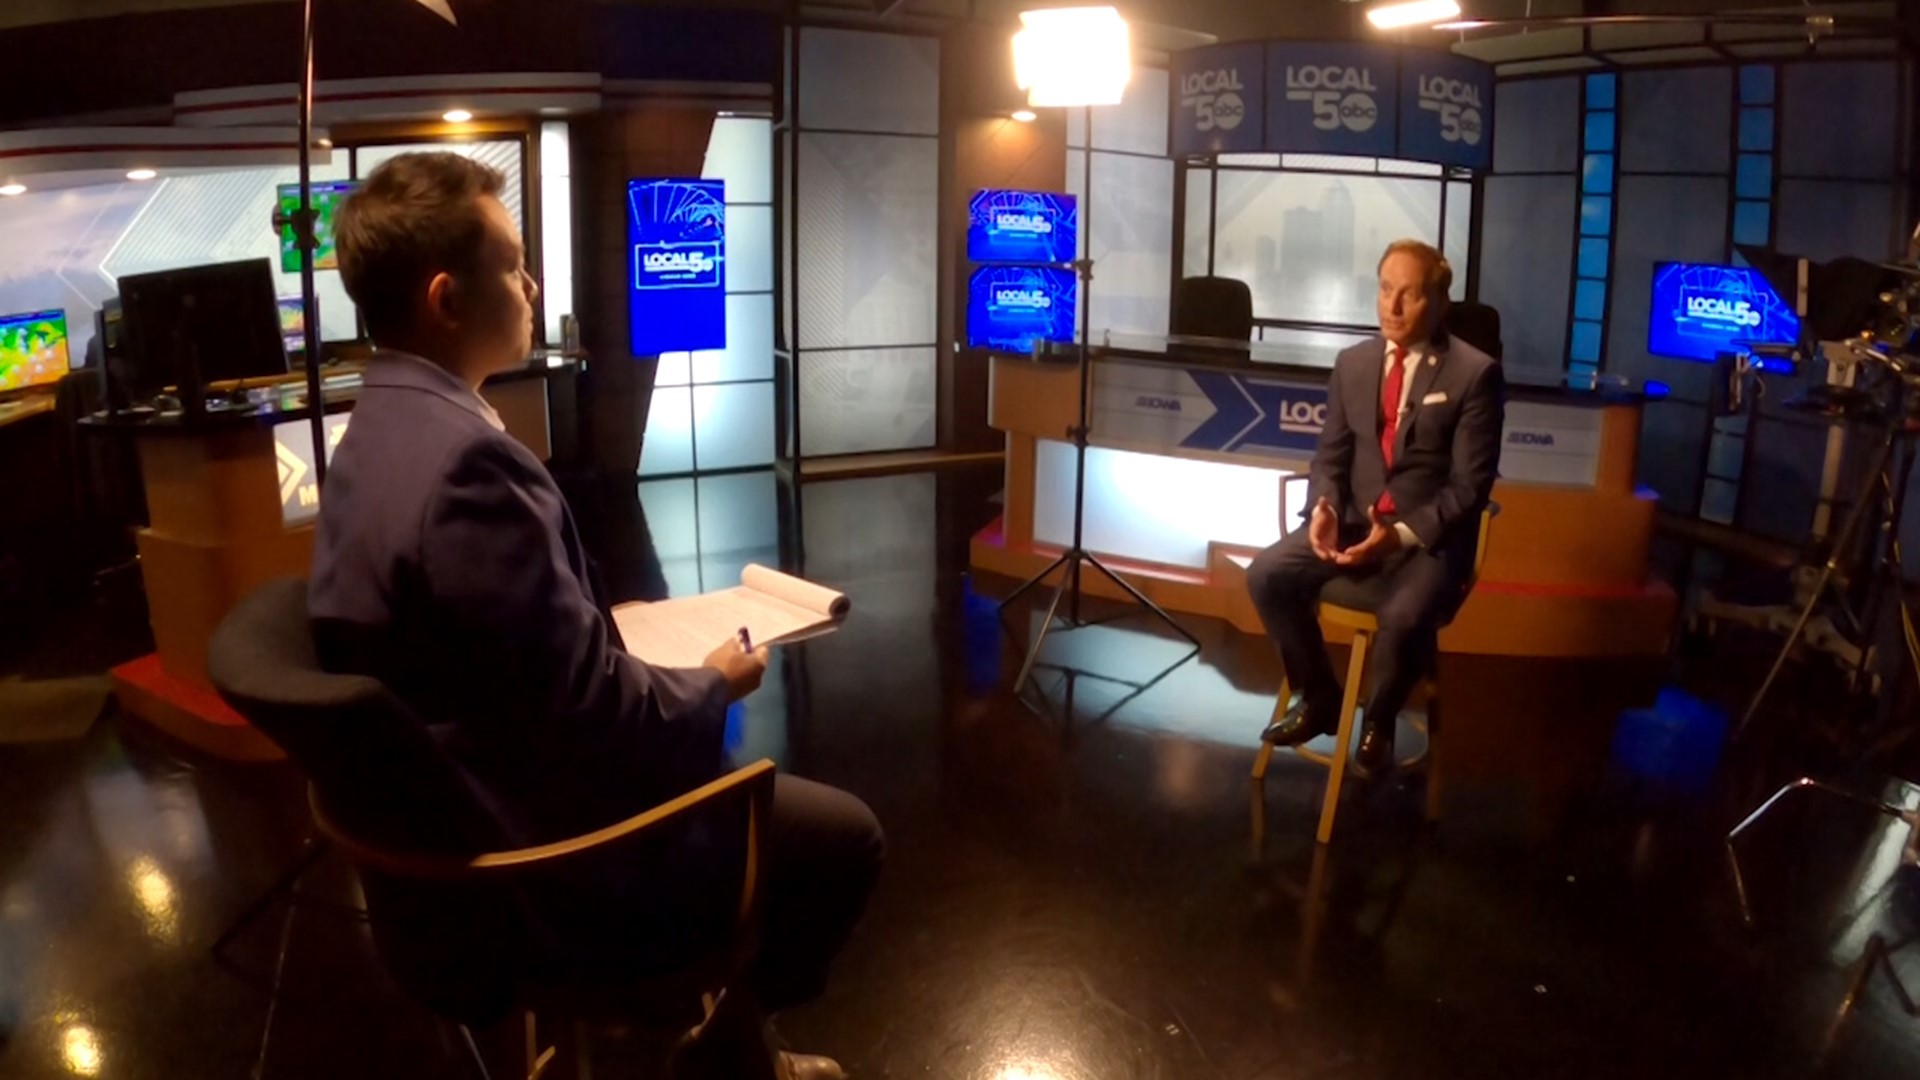 In a one-on-one interview with Local 5, Paul Pate said his office is working diligently to combat misinformation and disinformation.